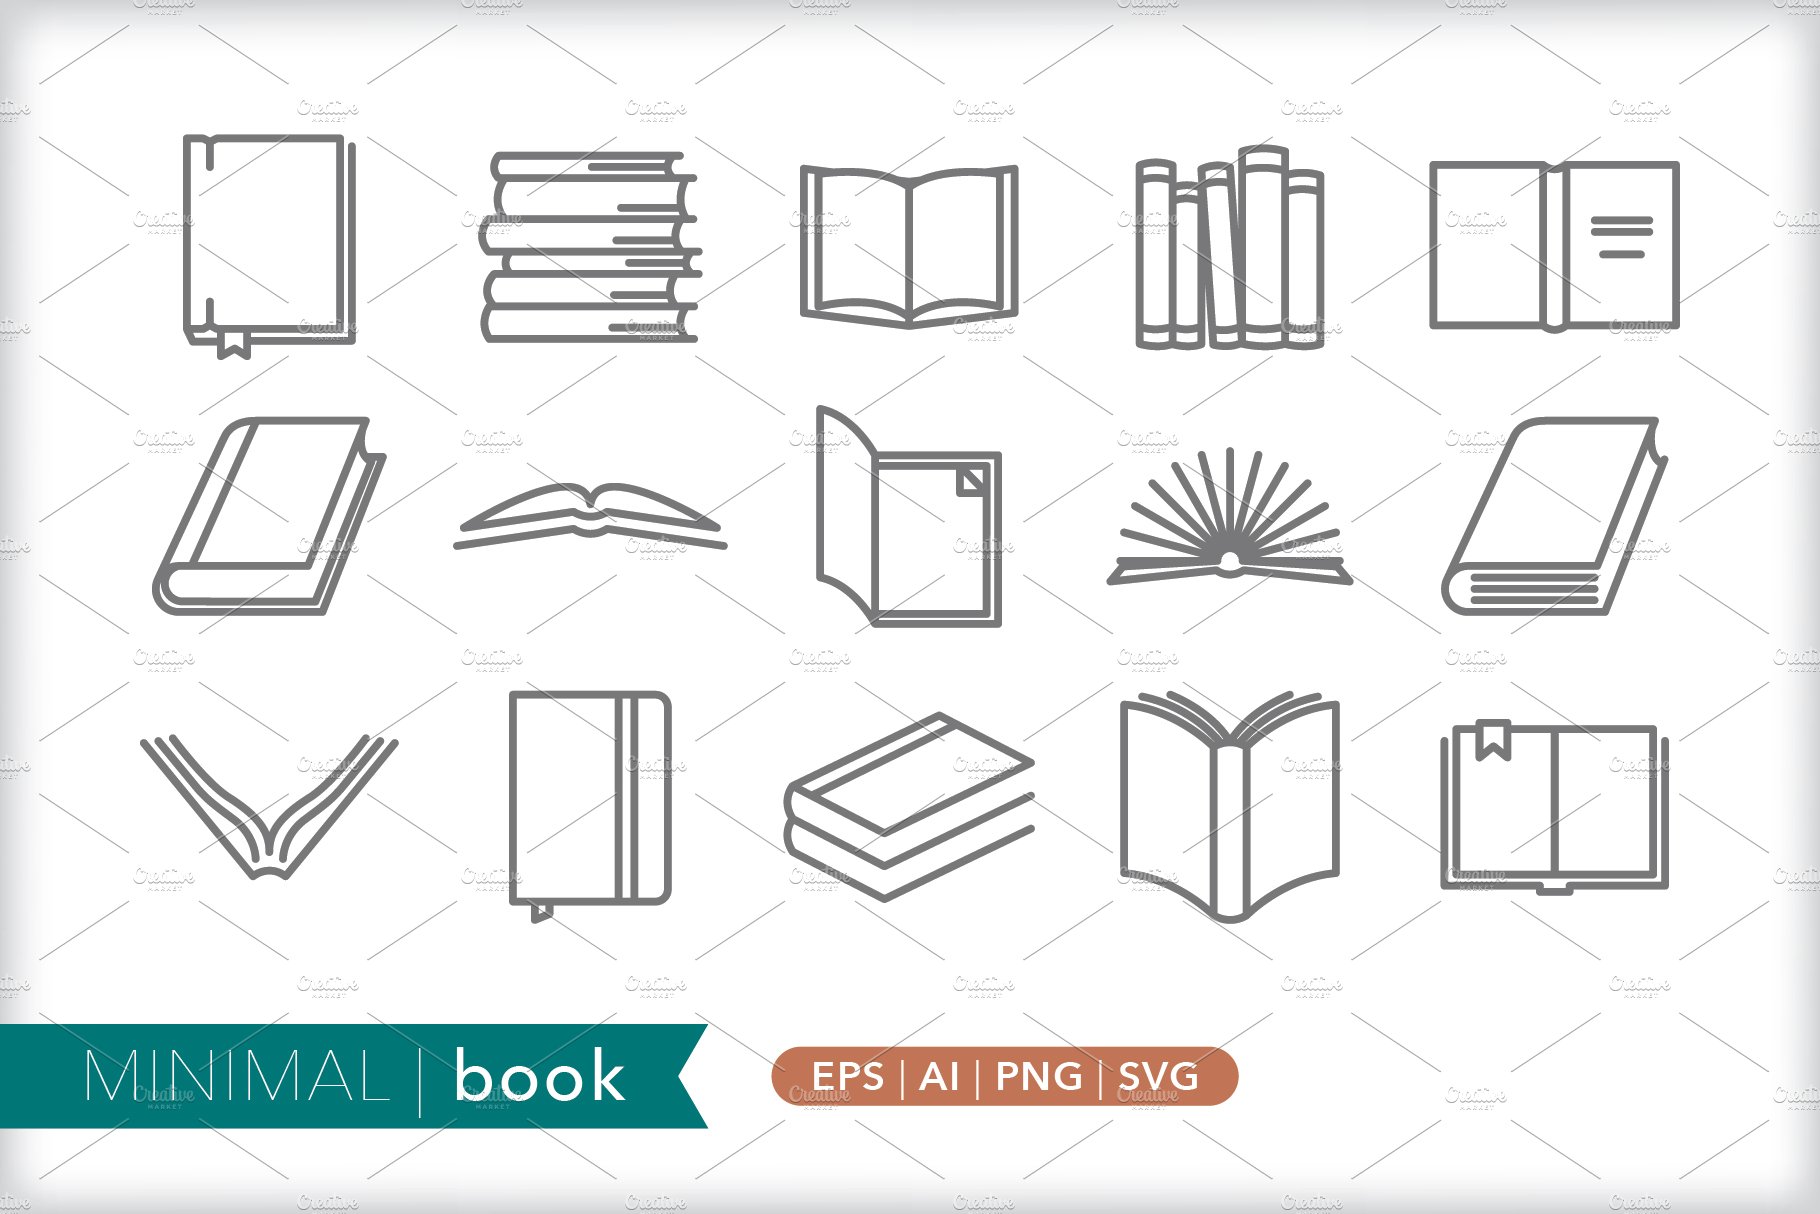 Minimal book icons cover image.